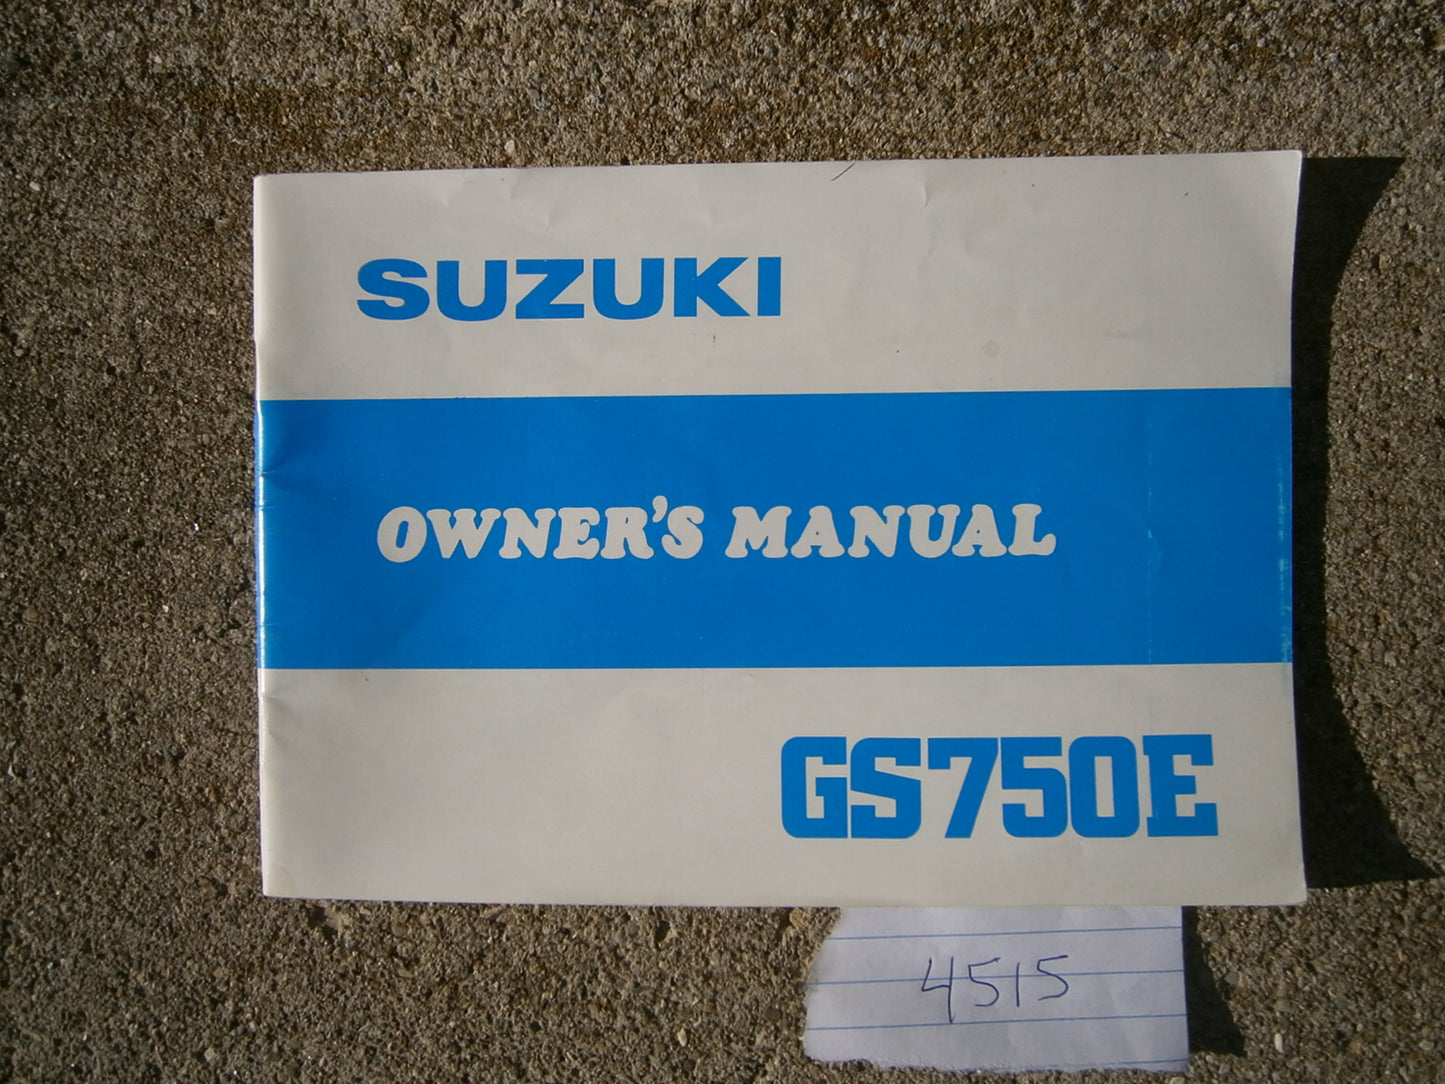 Suzuki GS750E Owners Manual New old stock 4515